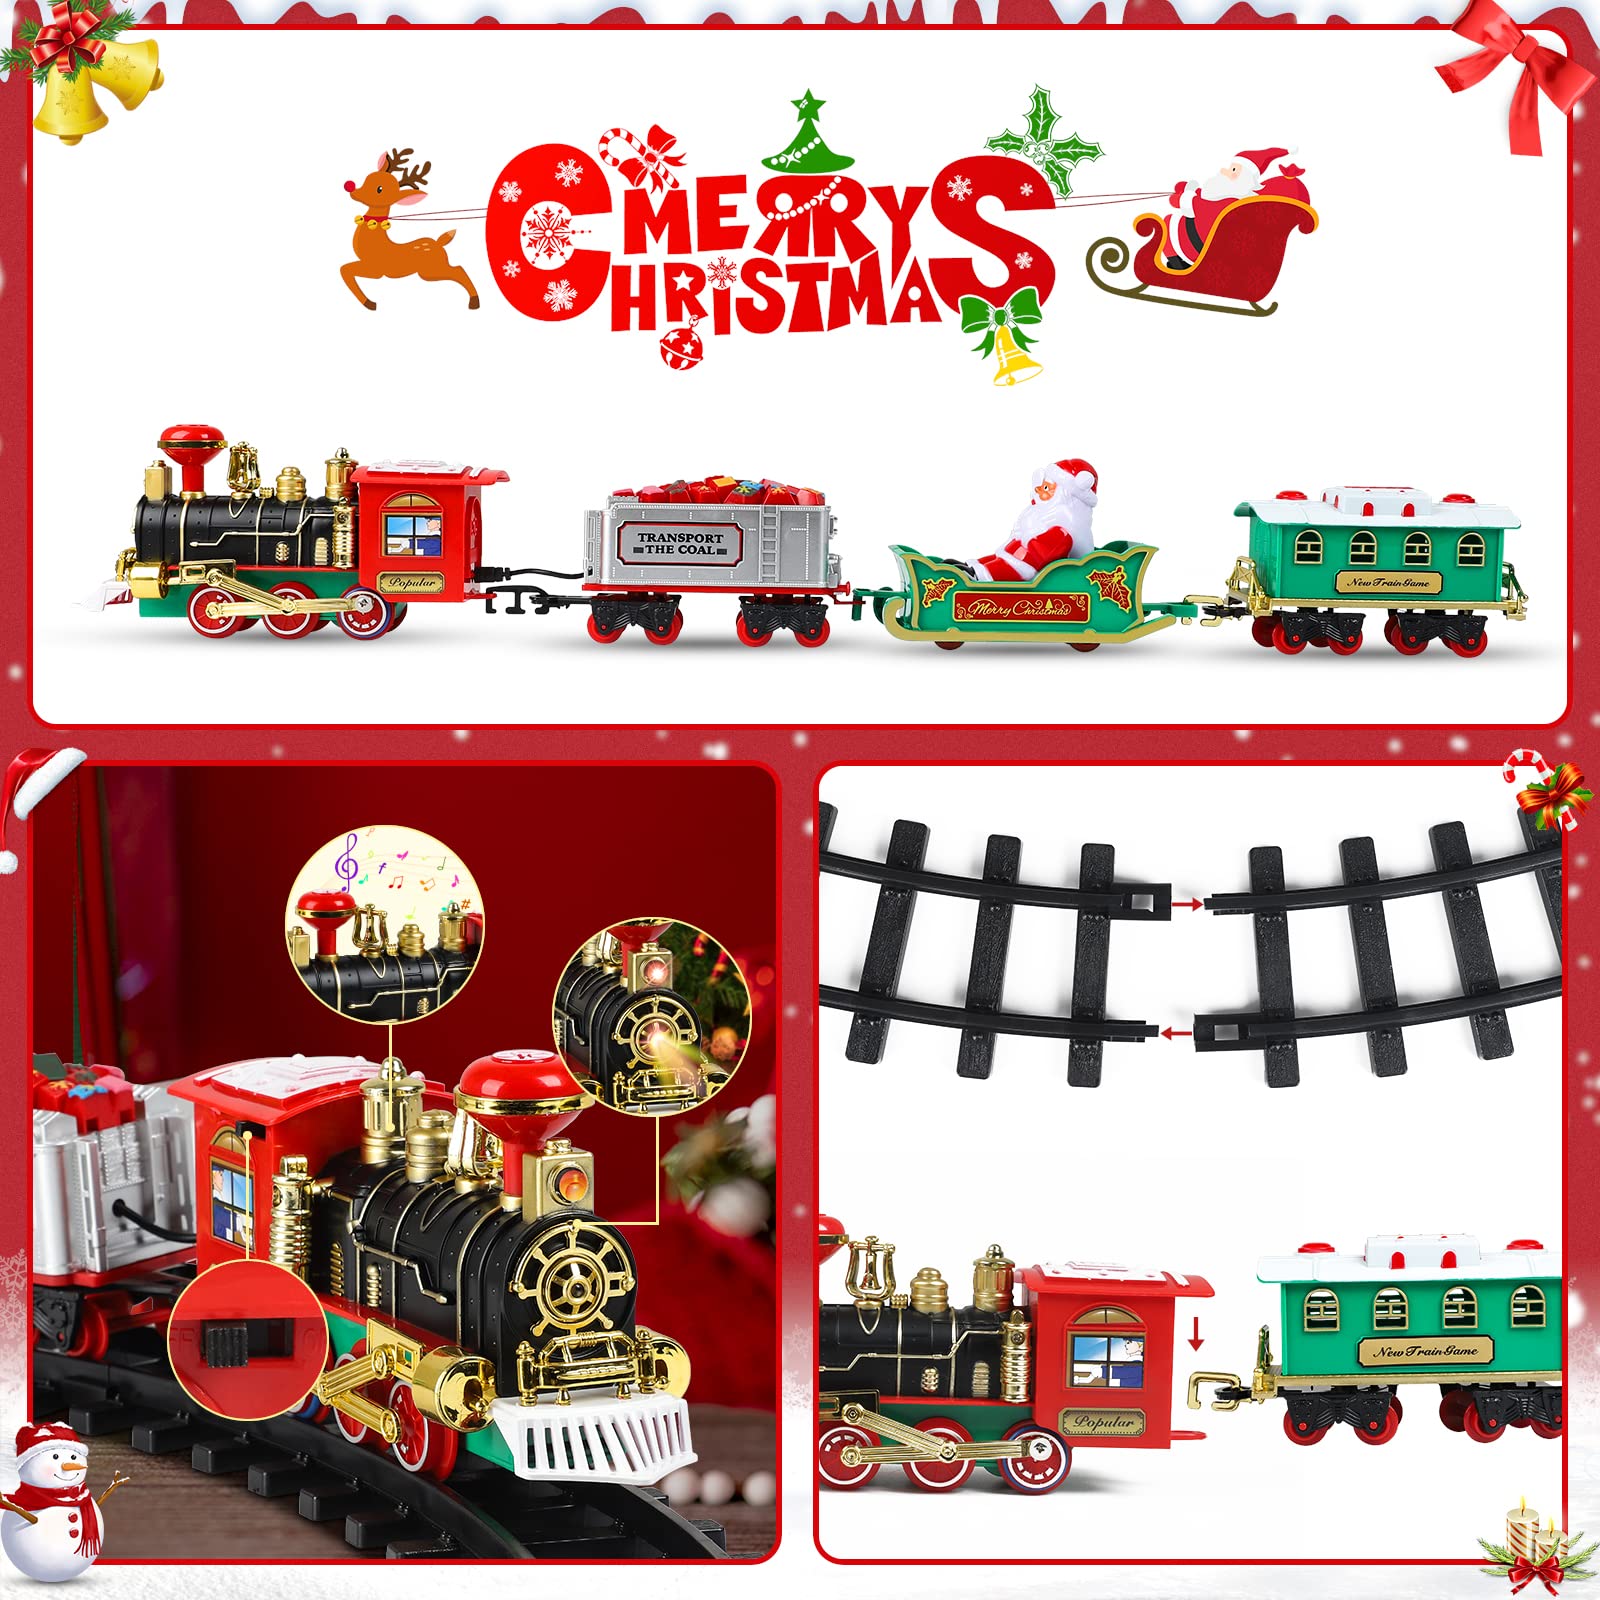 Christmas Train Set - Toy Train Set with Lights and Sounds, Round Railway Tracks for Under/Around The Christmas Tree, Best Gifts for 3 4 5 6 7 8+ Years Kids Boys Girls